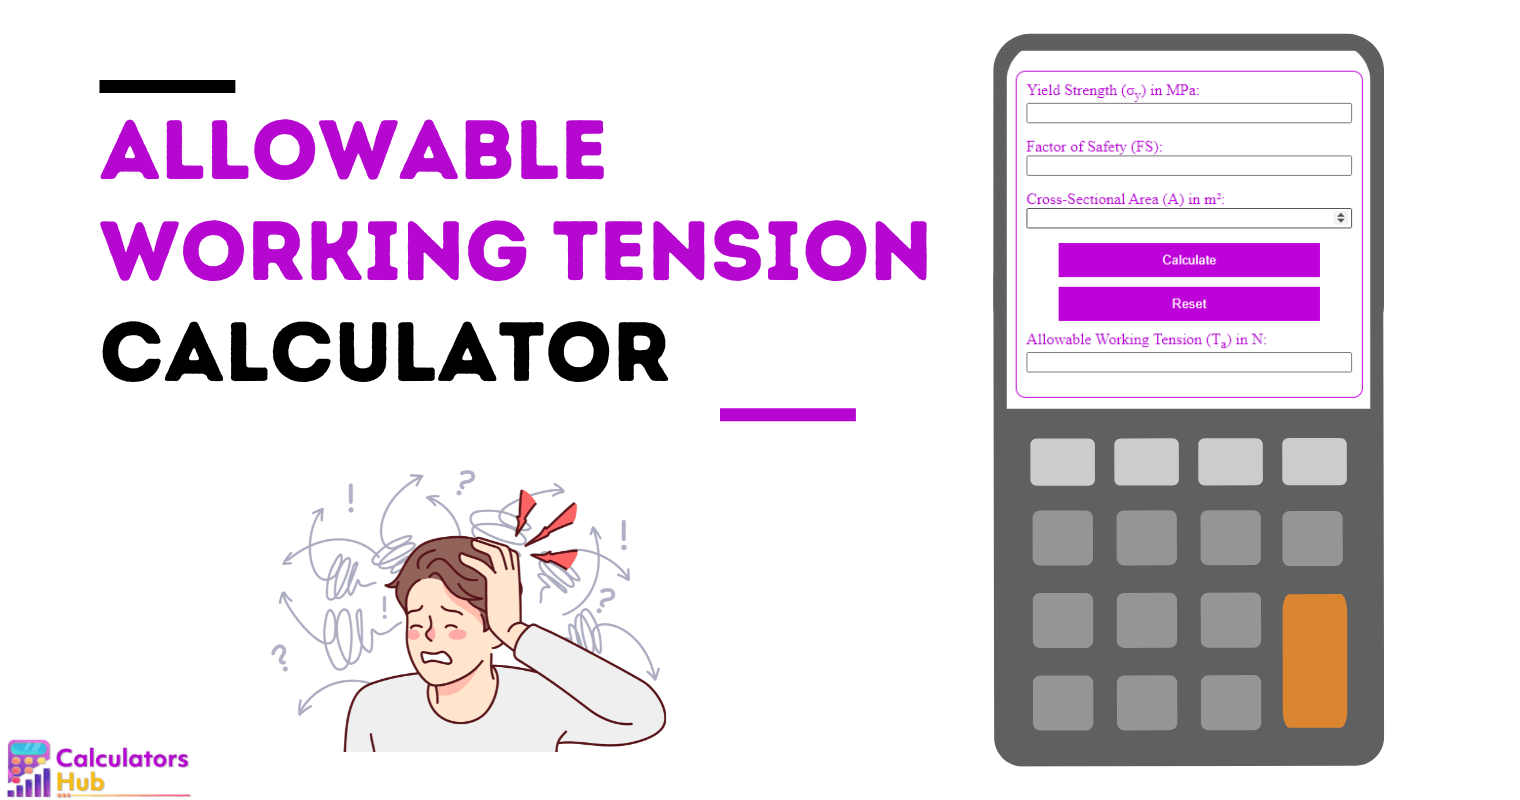 Allowable Working Tension Calculator